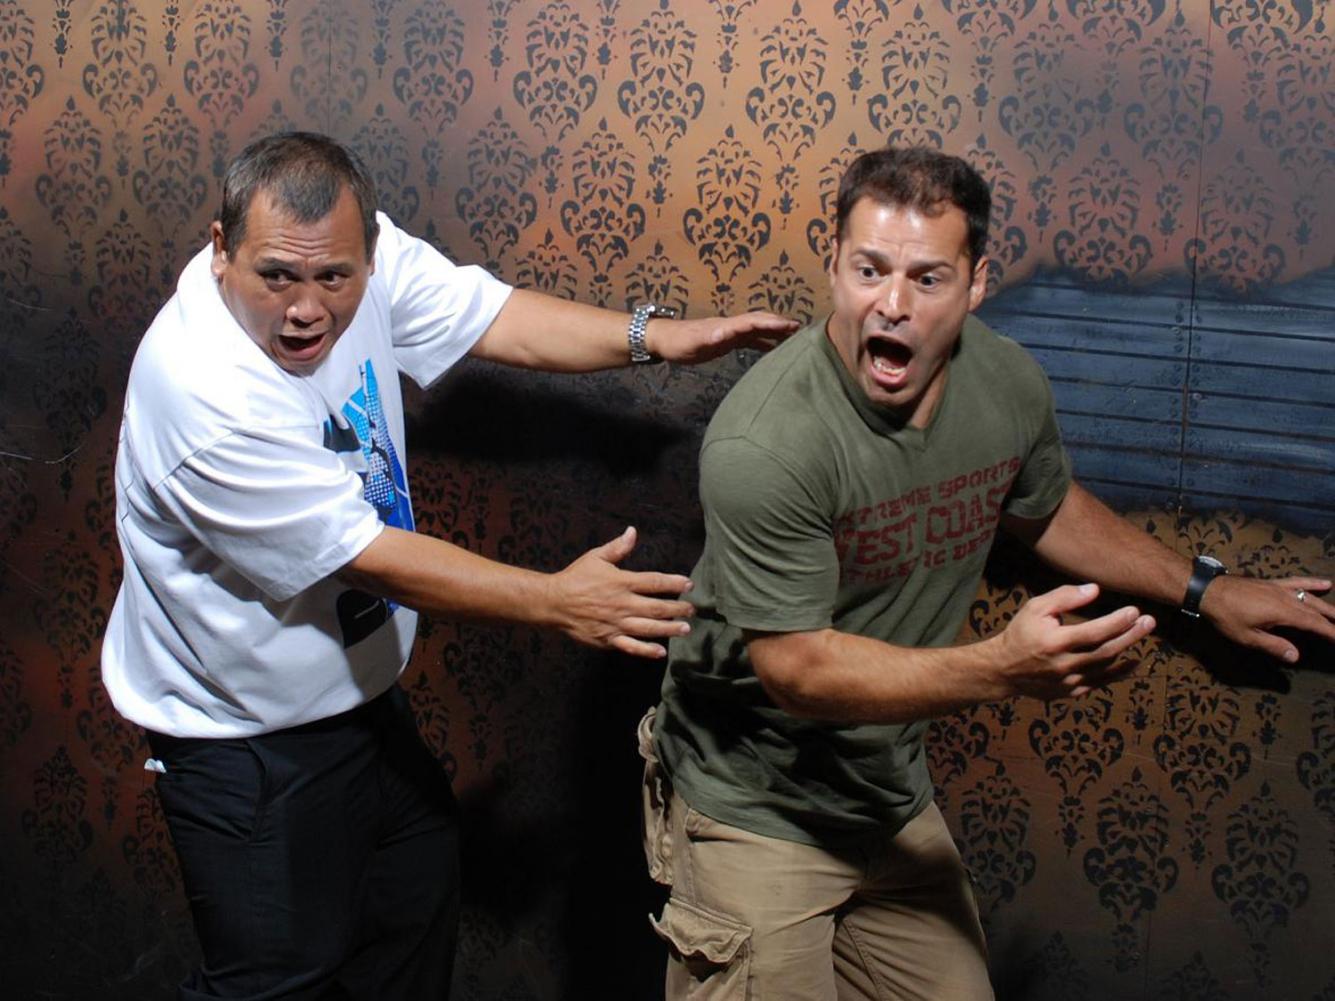 Nightmares Fear Factory Top 40 September 2013 pic01572